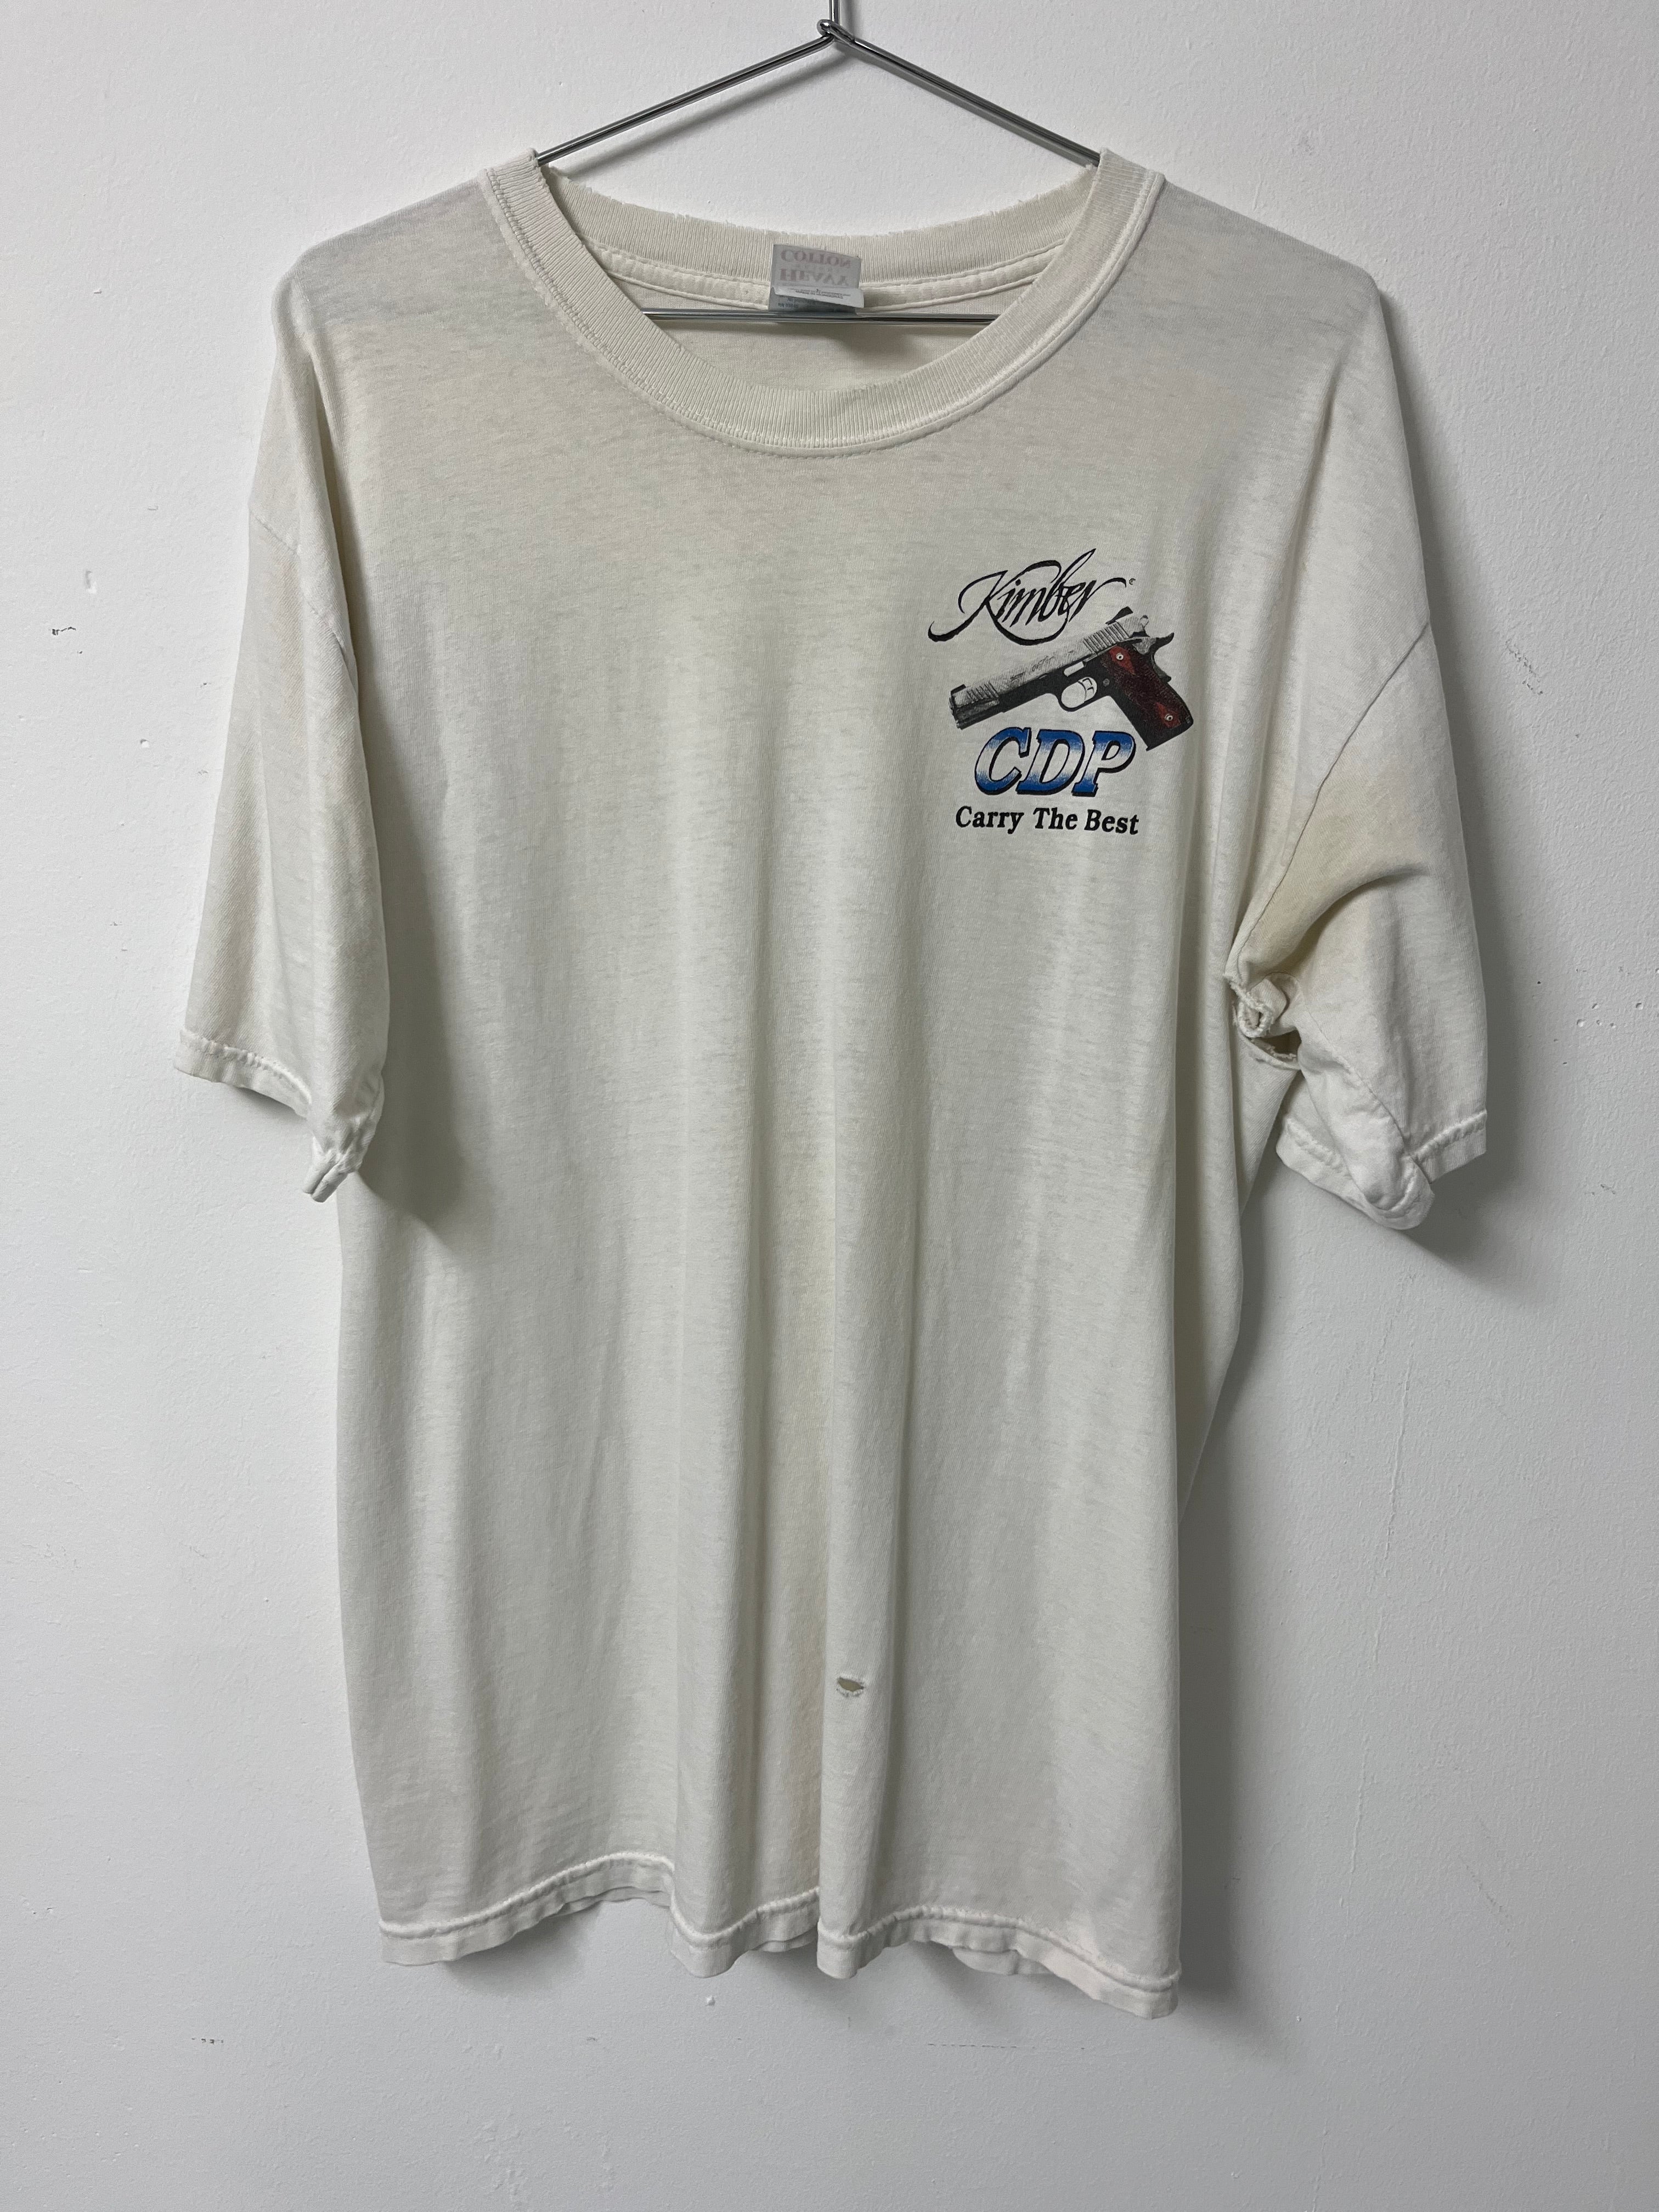 1990s Kimber CDP ‘Carry the Best’ Gun Distressed T-Shirt - Aged White - L/XL